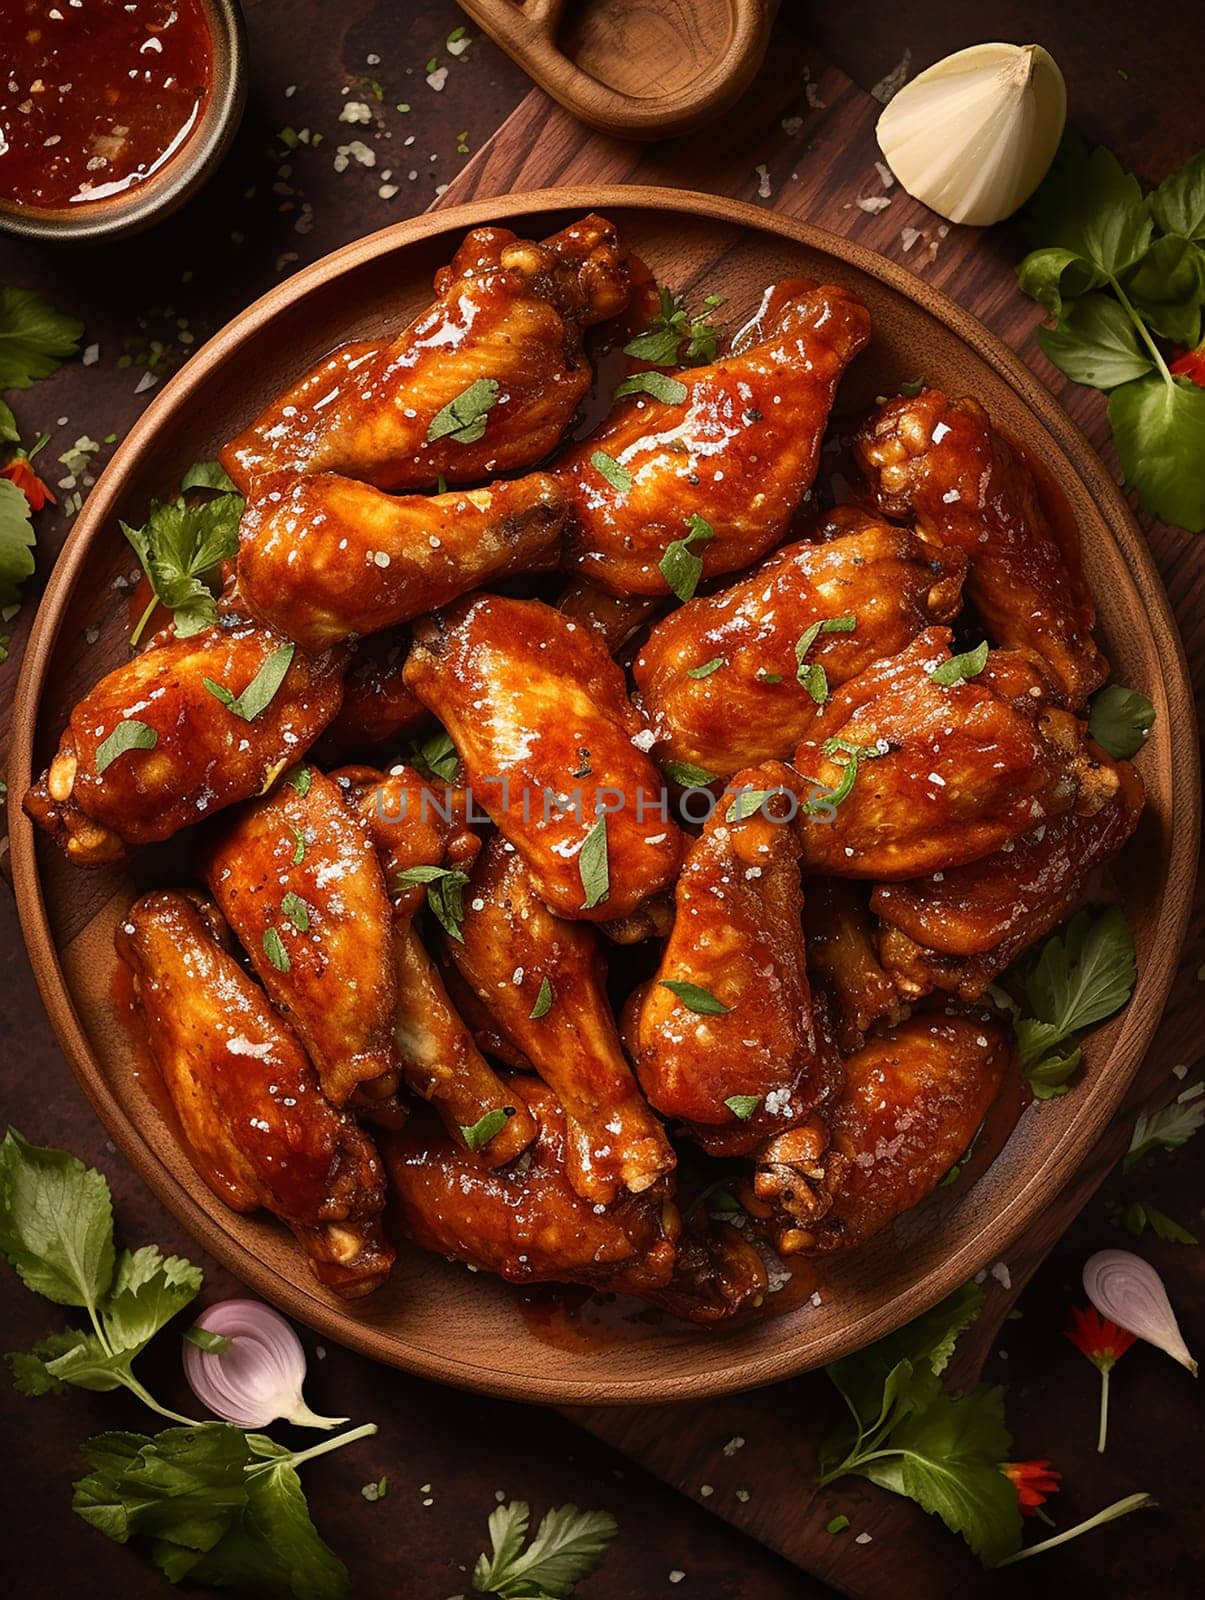 Glazed chicken wings on a wooden plate garnished with herbs.